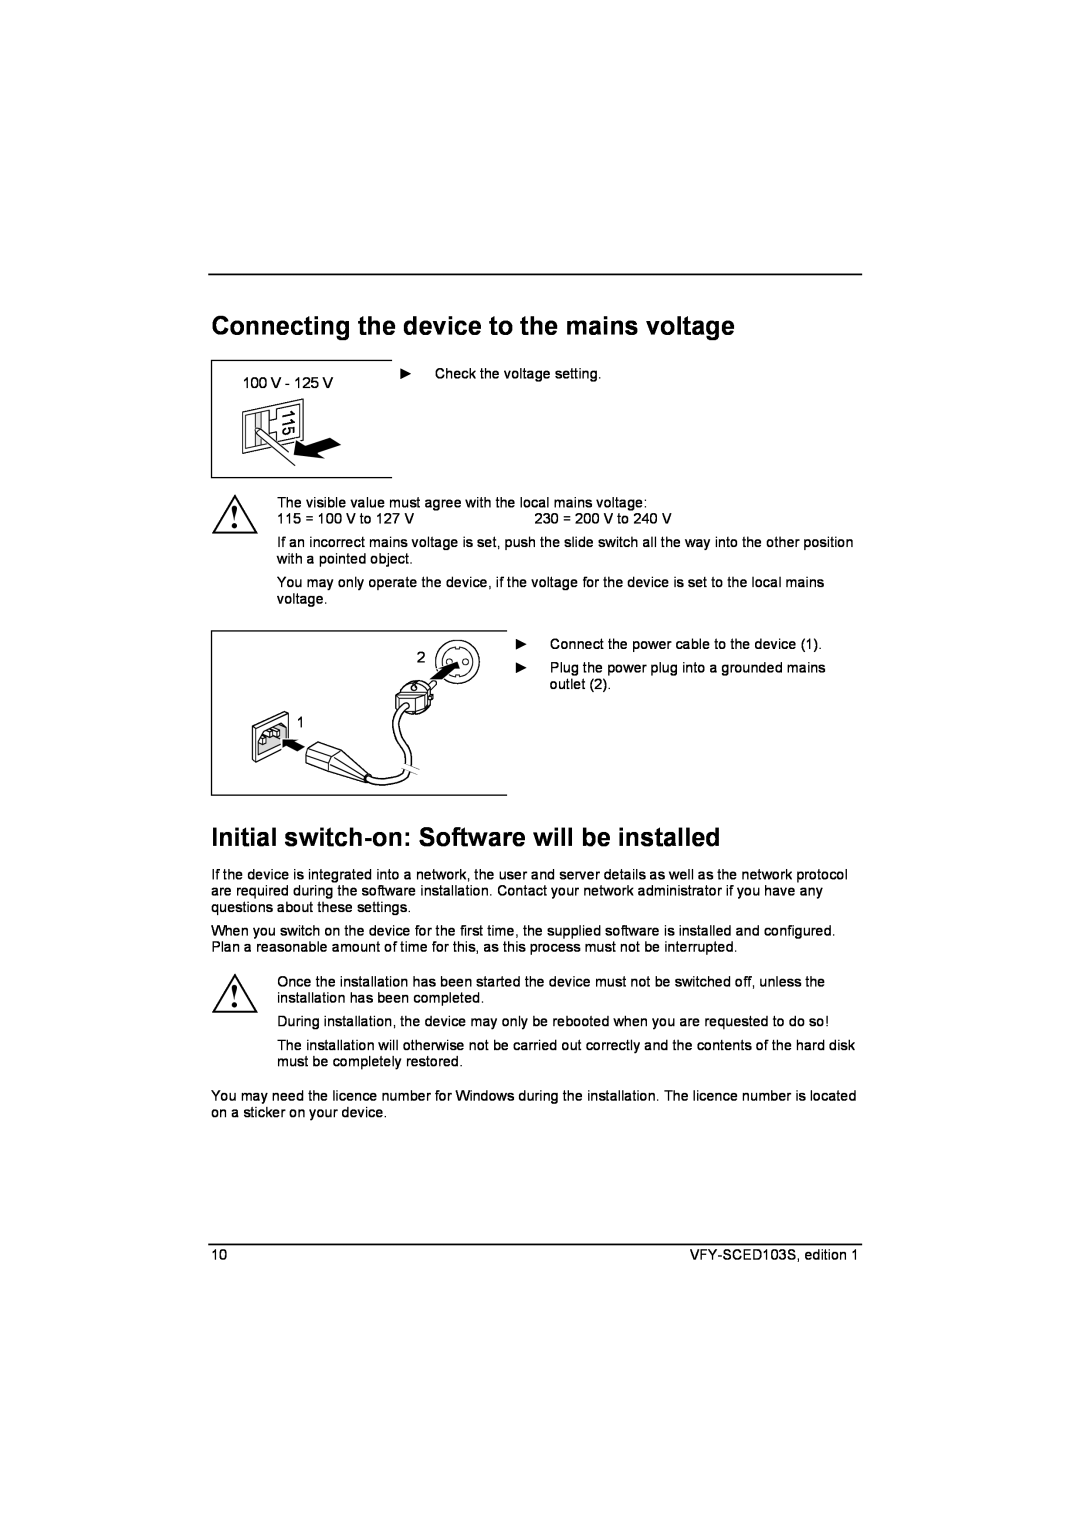 Fujitsu Siemens Computers X103 SFF manual Connecting the device to the mains voltage, 230 = 200 V to 